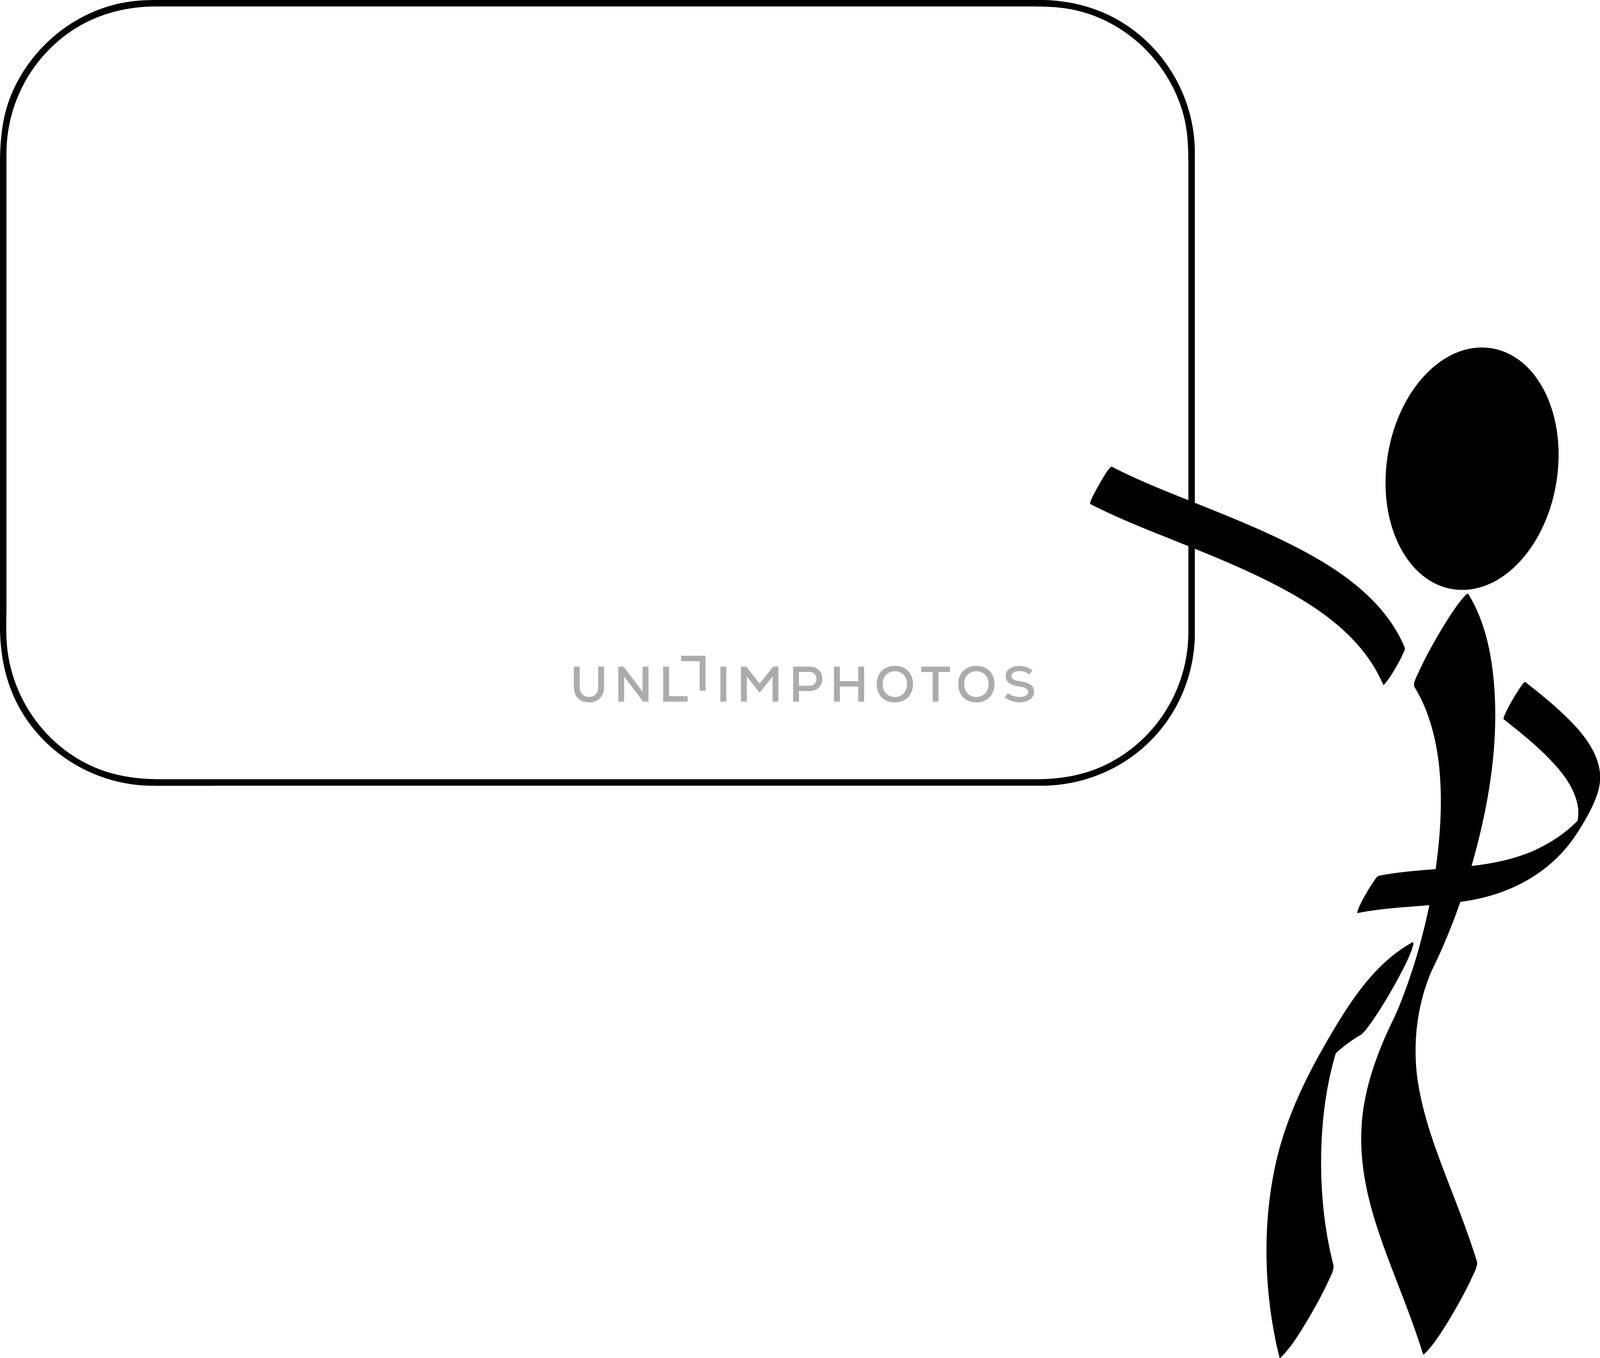 A stylized person pointing on a blank blackboard. All isolated on white background.